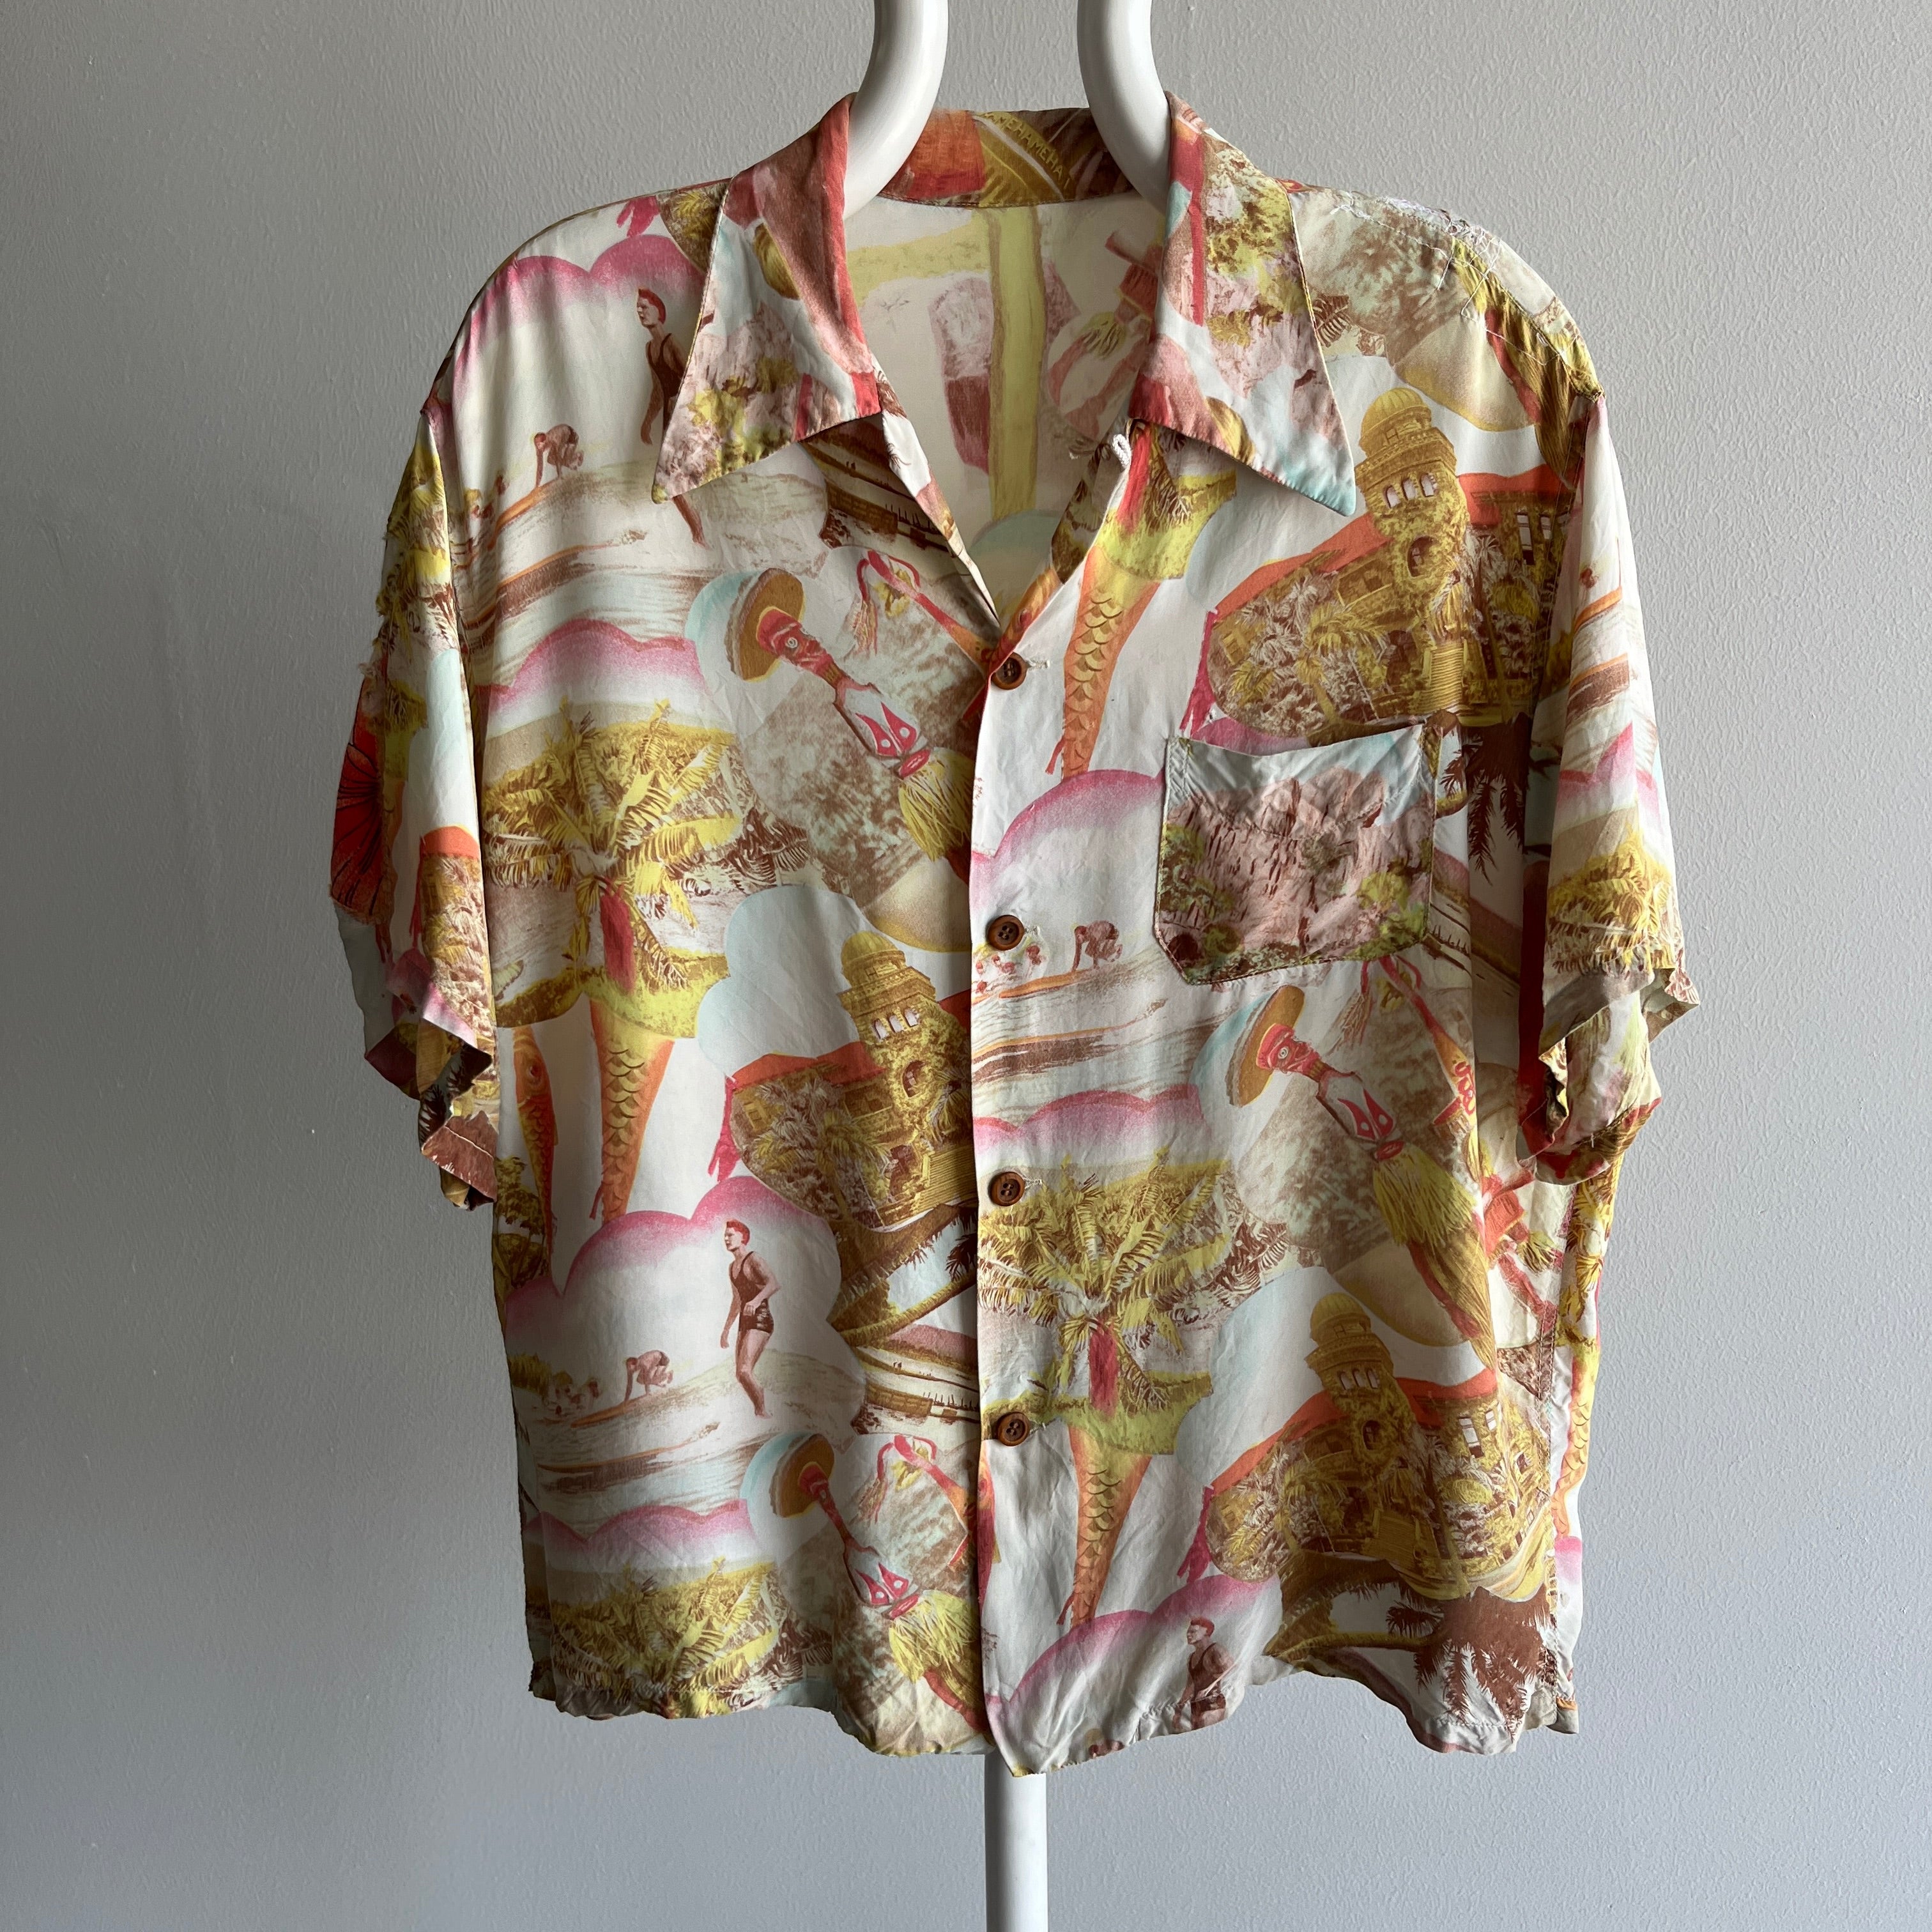 1950/60s Aloha Shirt - Highly Collectible (Mended)